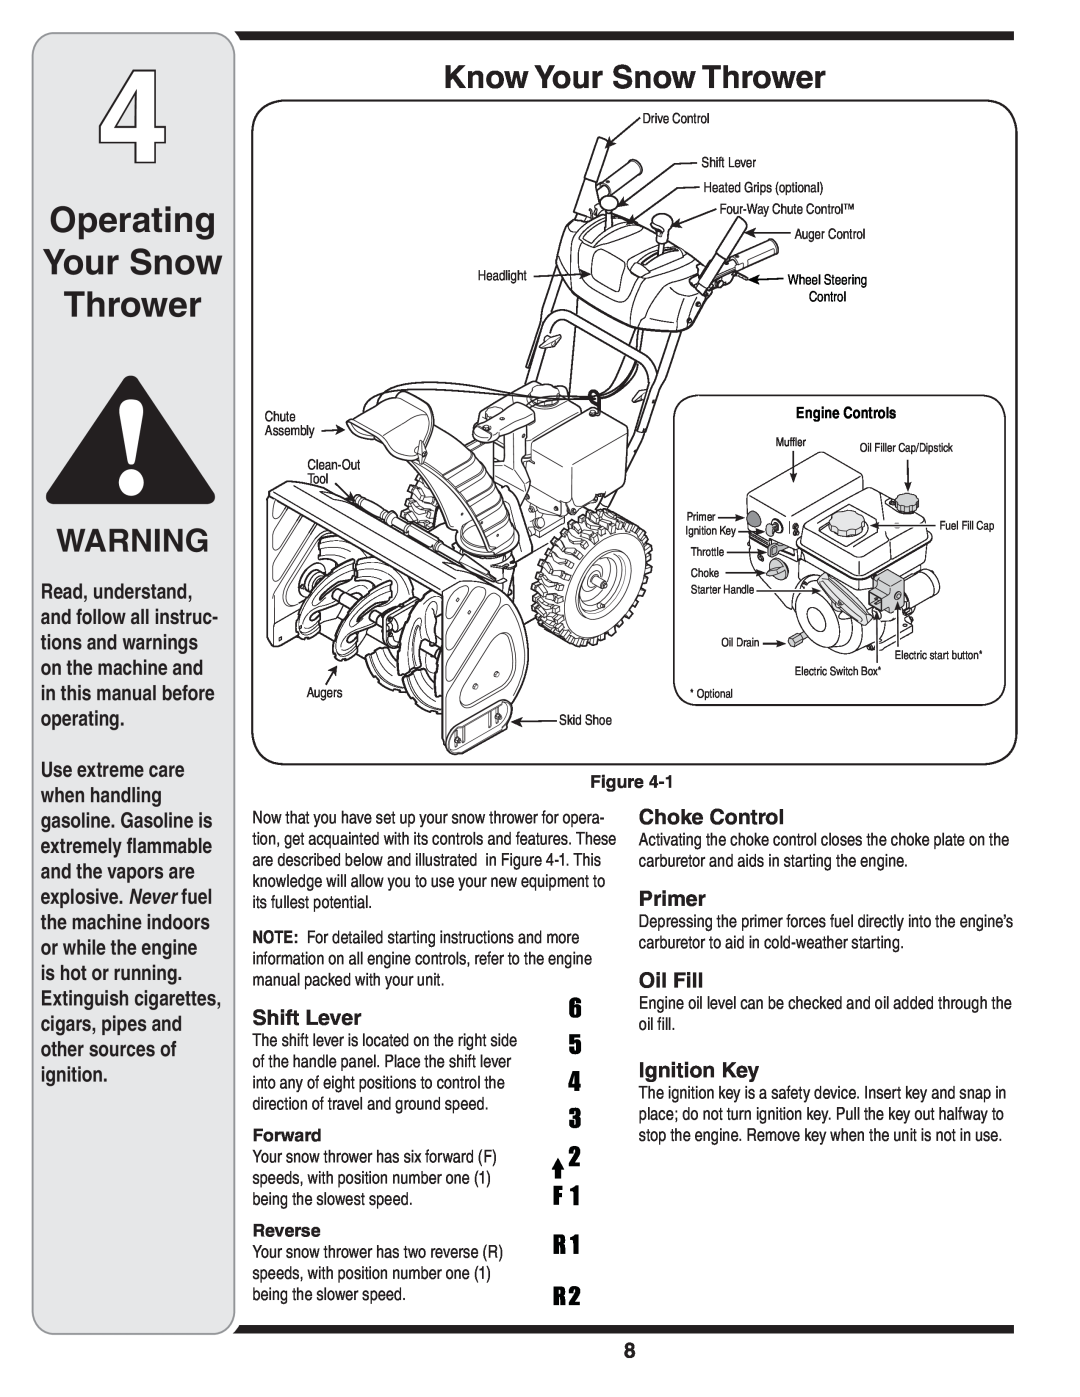 Bolens 31AE6GKF500 Operating Your Snow Thrower, Know Your Snow Thrower, Shift Lever, Choke Control, Primer, Oil Fill 